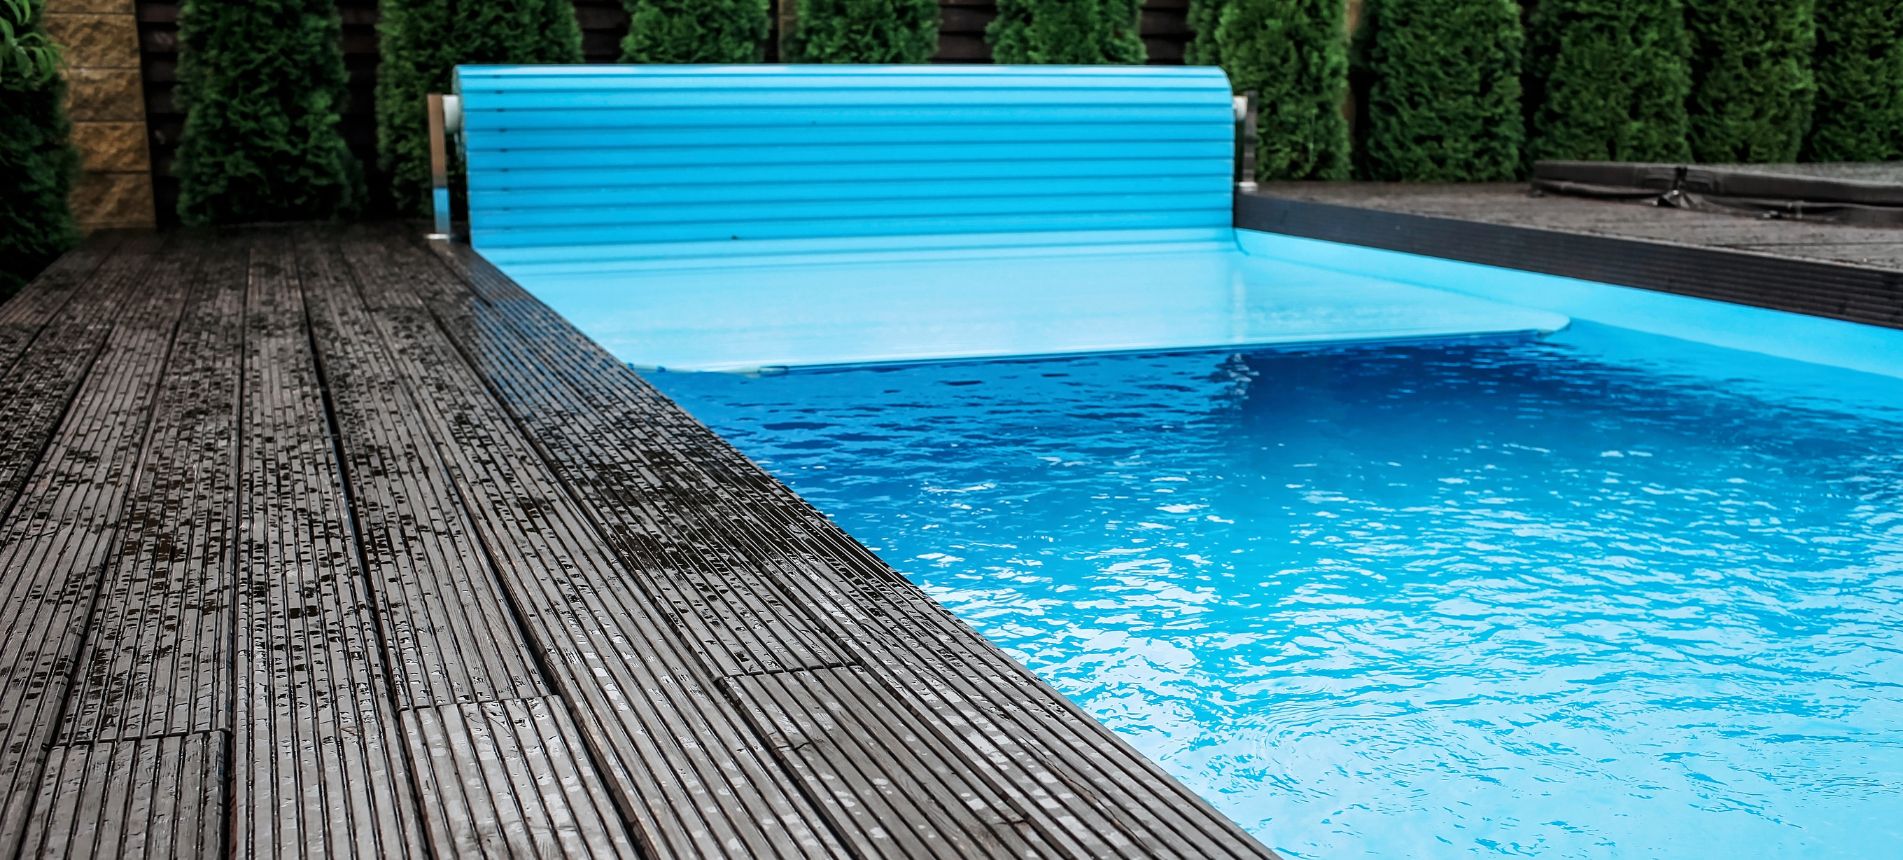 How To Turn Your Pool Into a Heated Pool